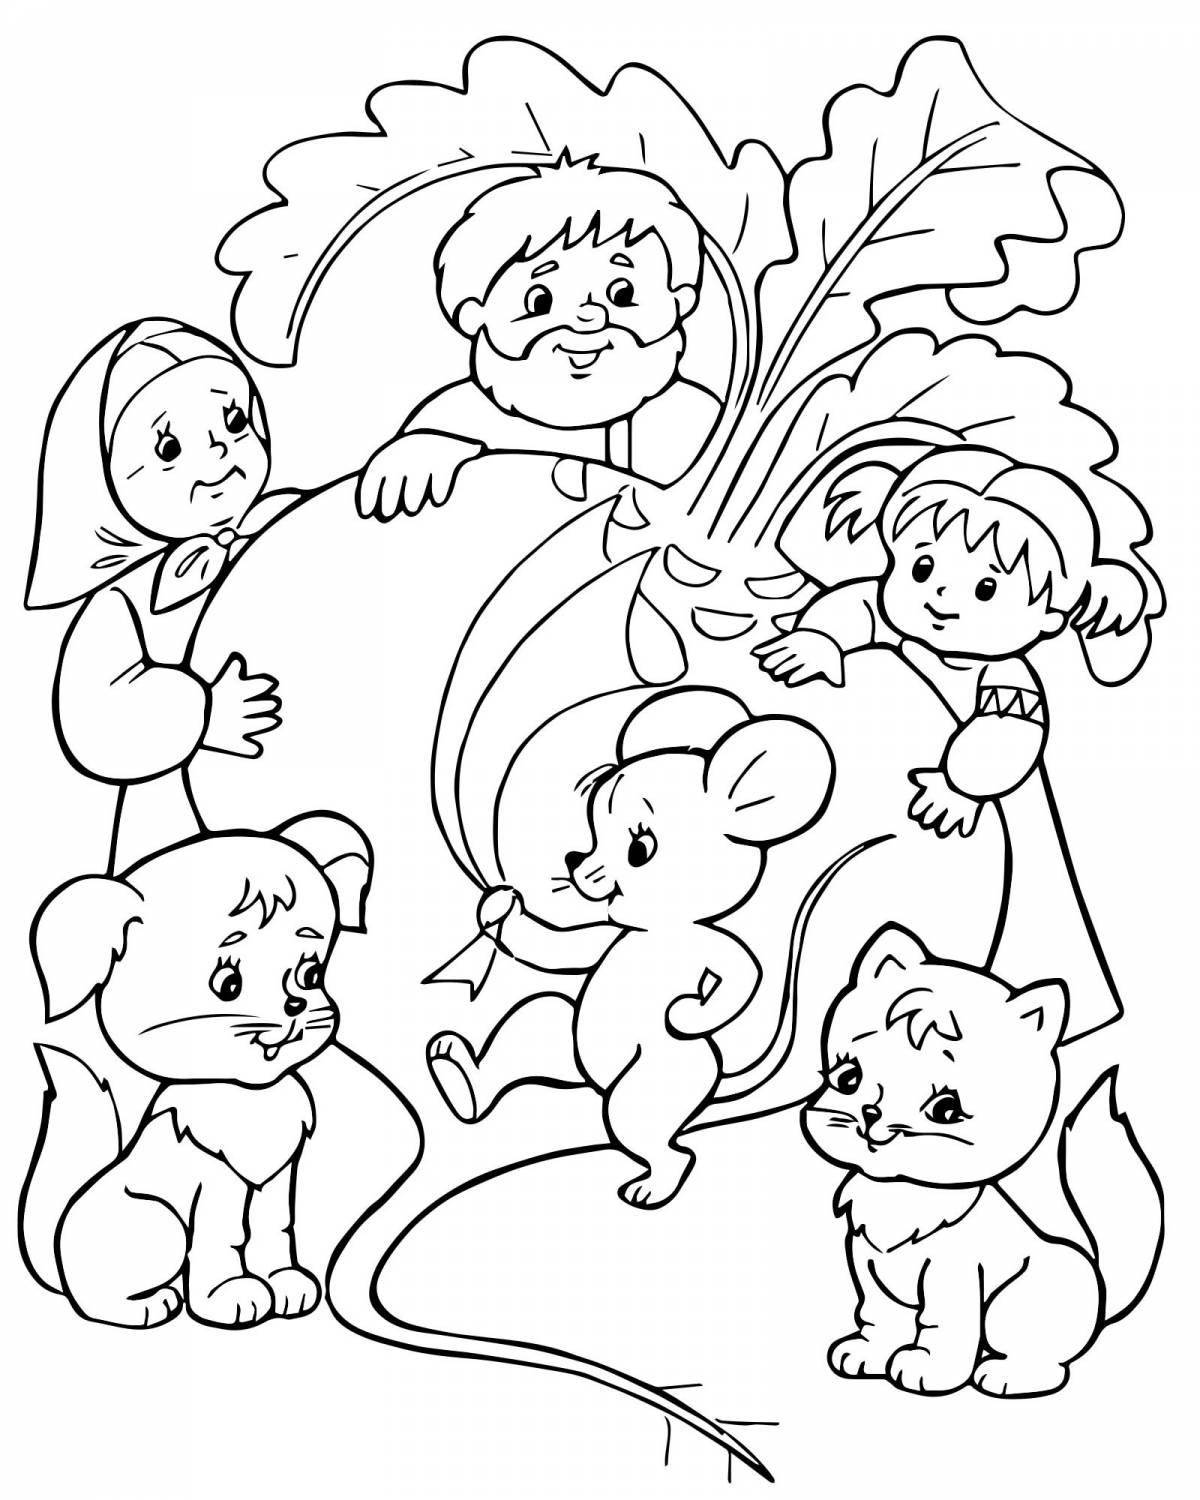 Bright coloring book based on fairy tales senior group